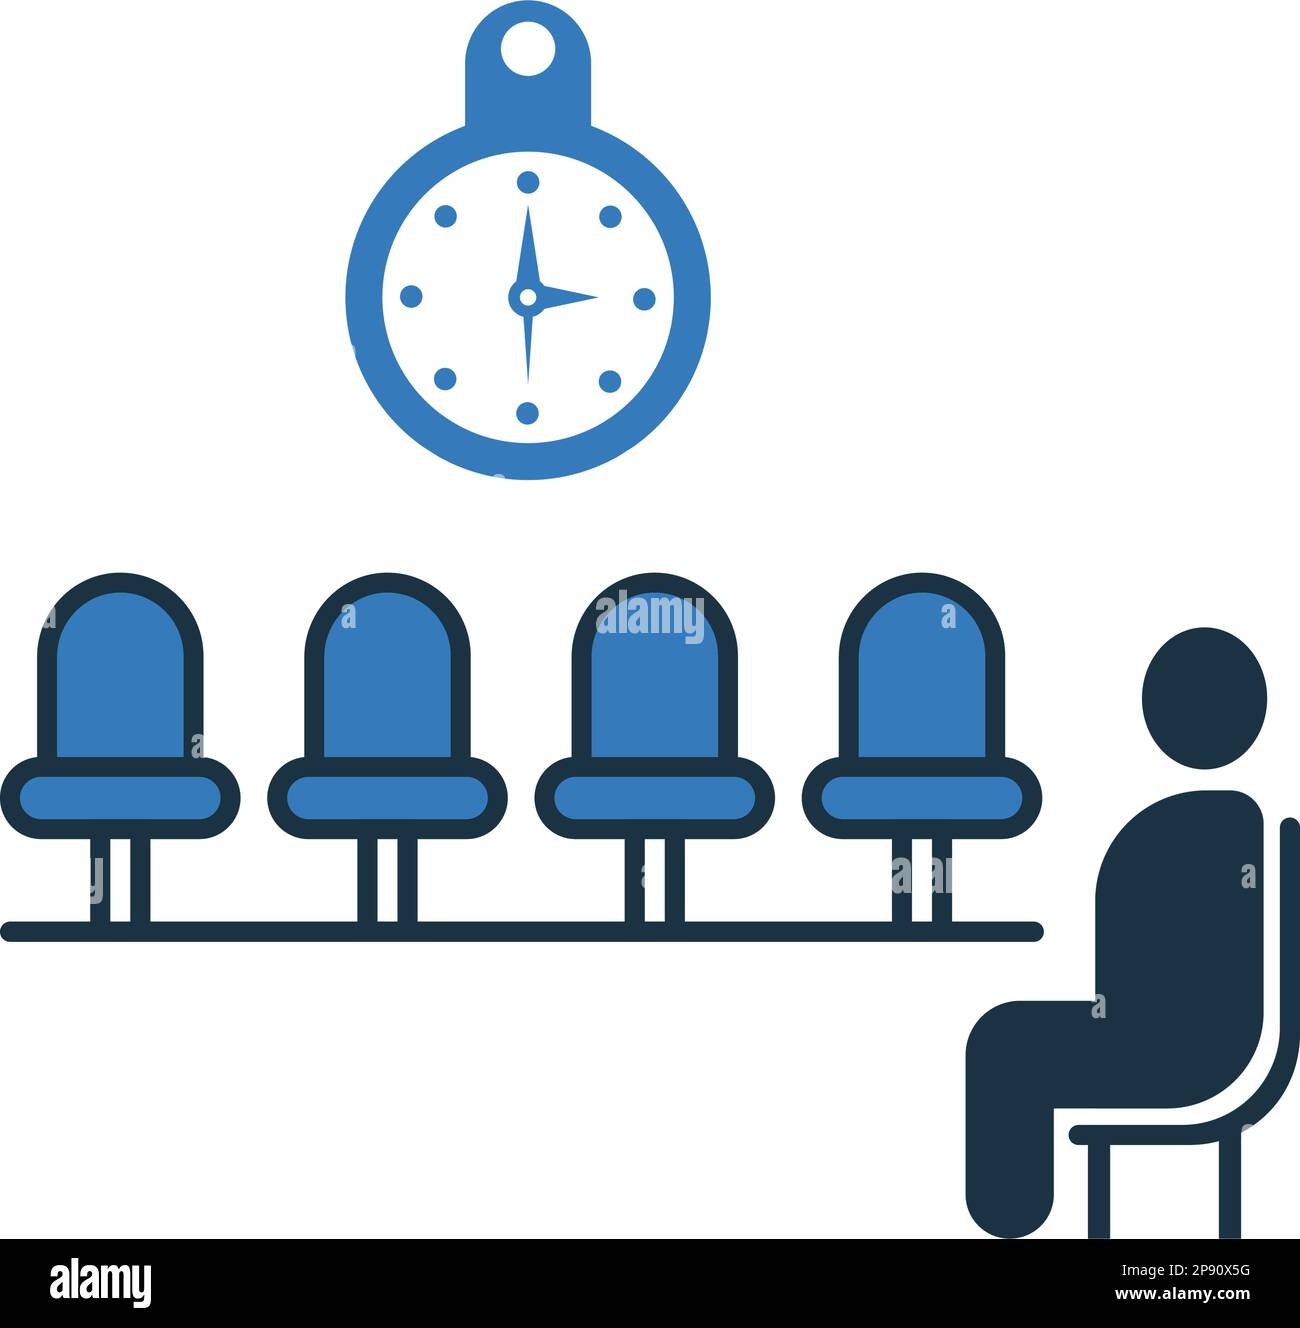 Waiting room icon / vector graphics. Beautiful design and fully editable vector for commercial, print media, web or any type of design projects. Stock Vector